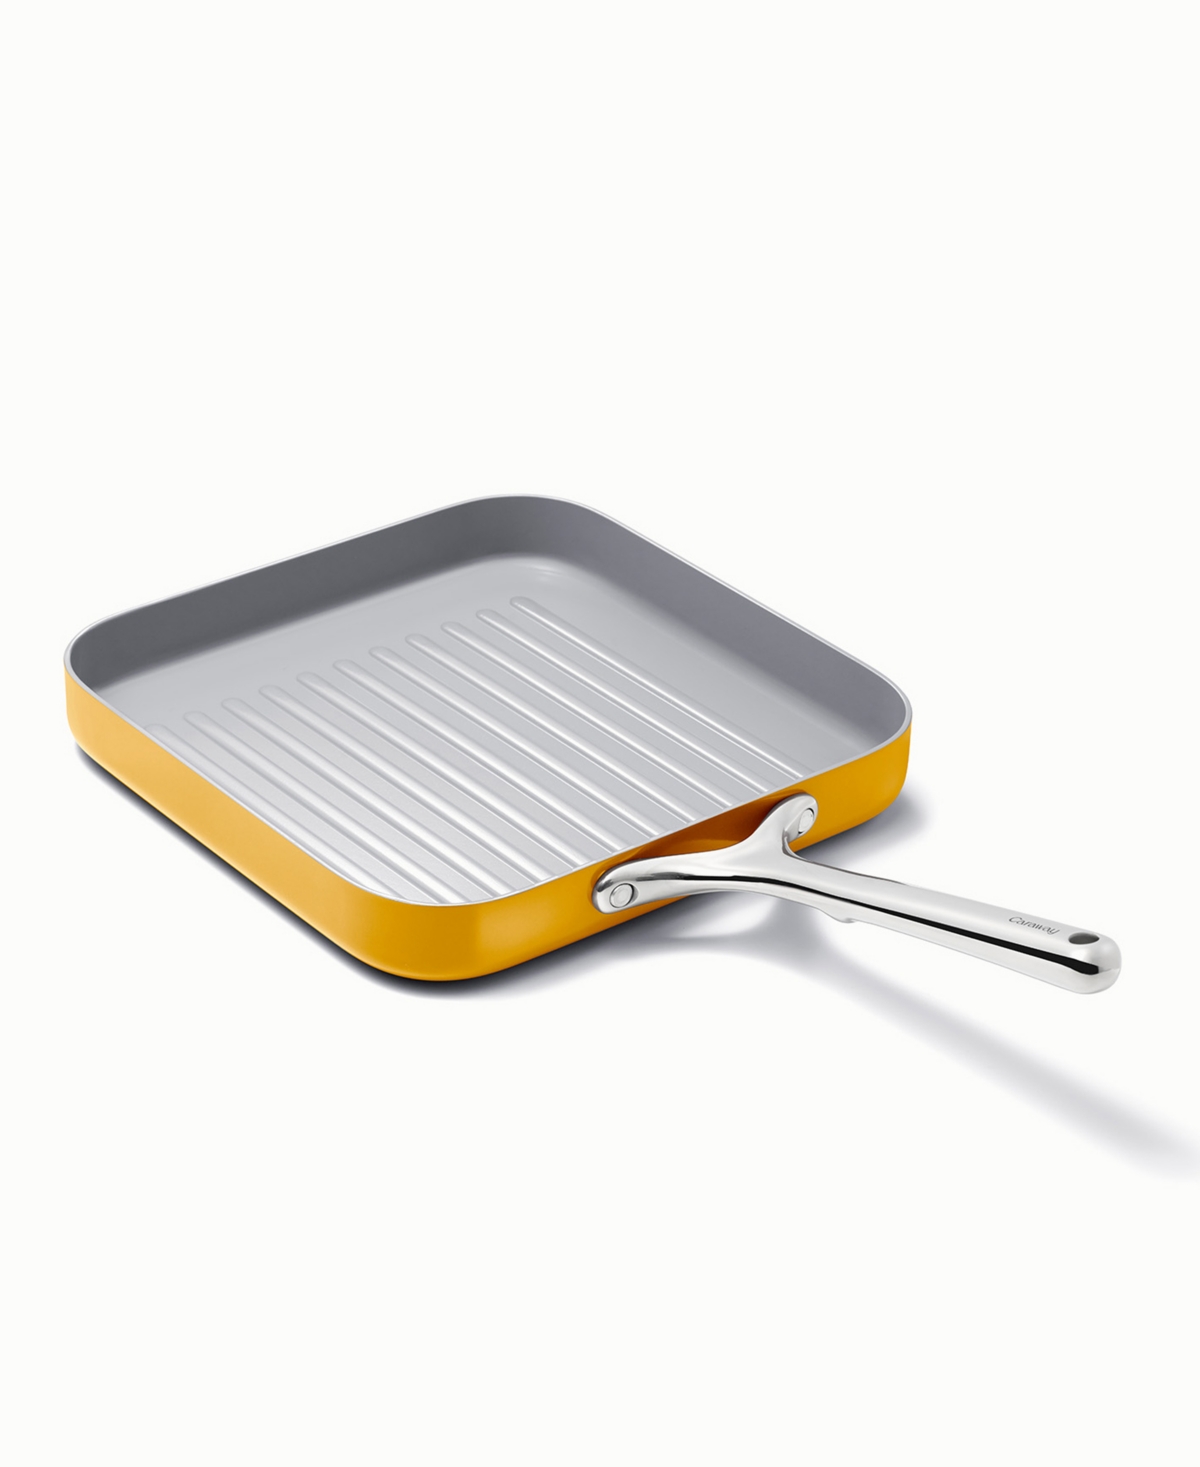 Caraway Harmless Ceramic-coated Non-stick 19.5" Square Grill Pan In Yellow